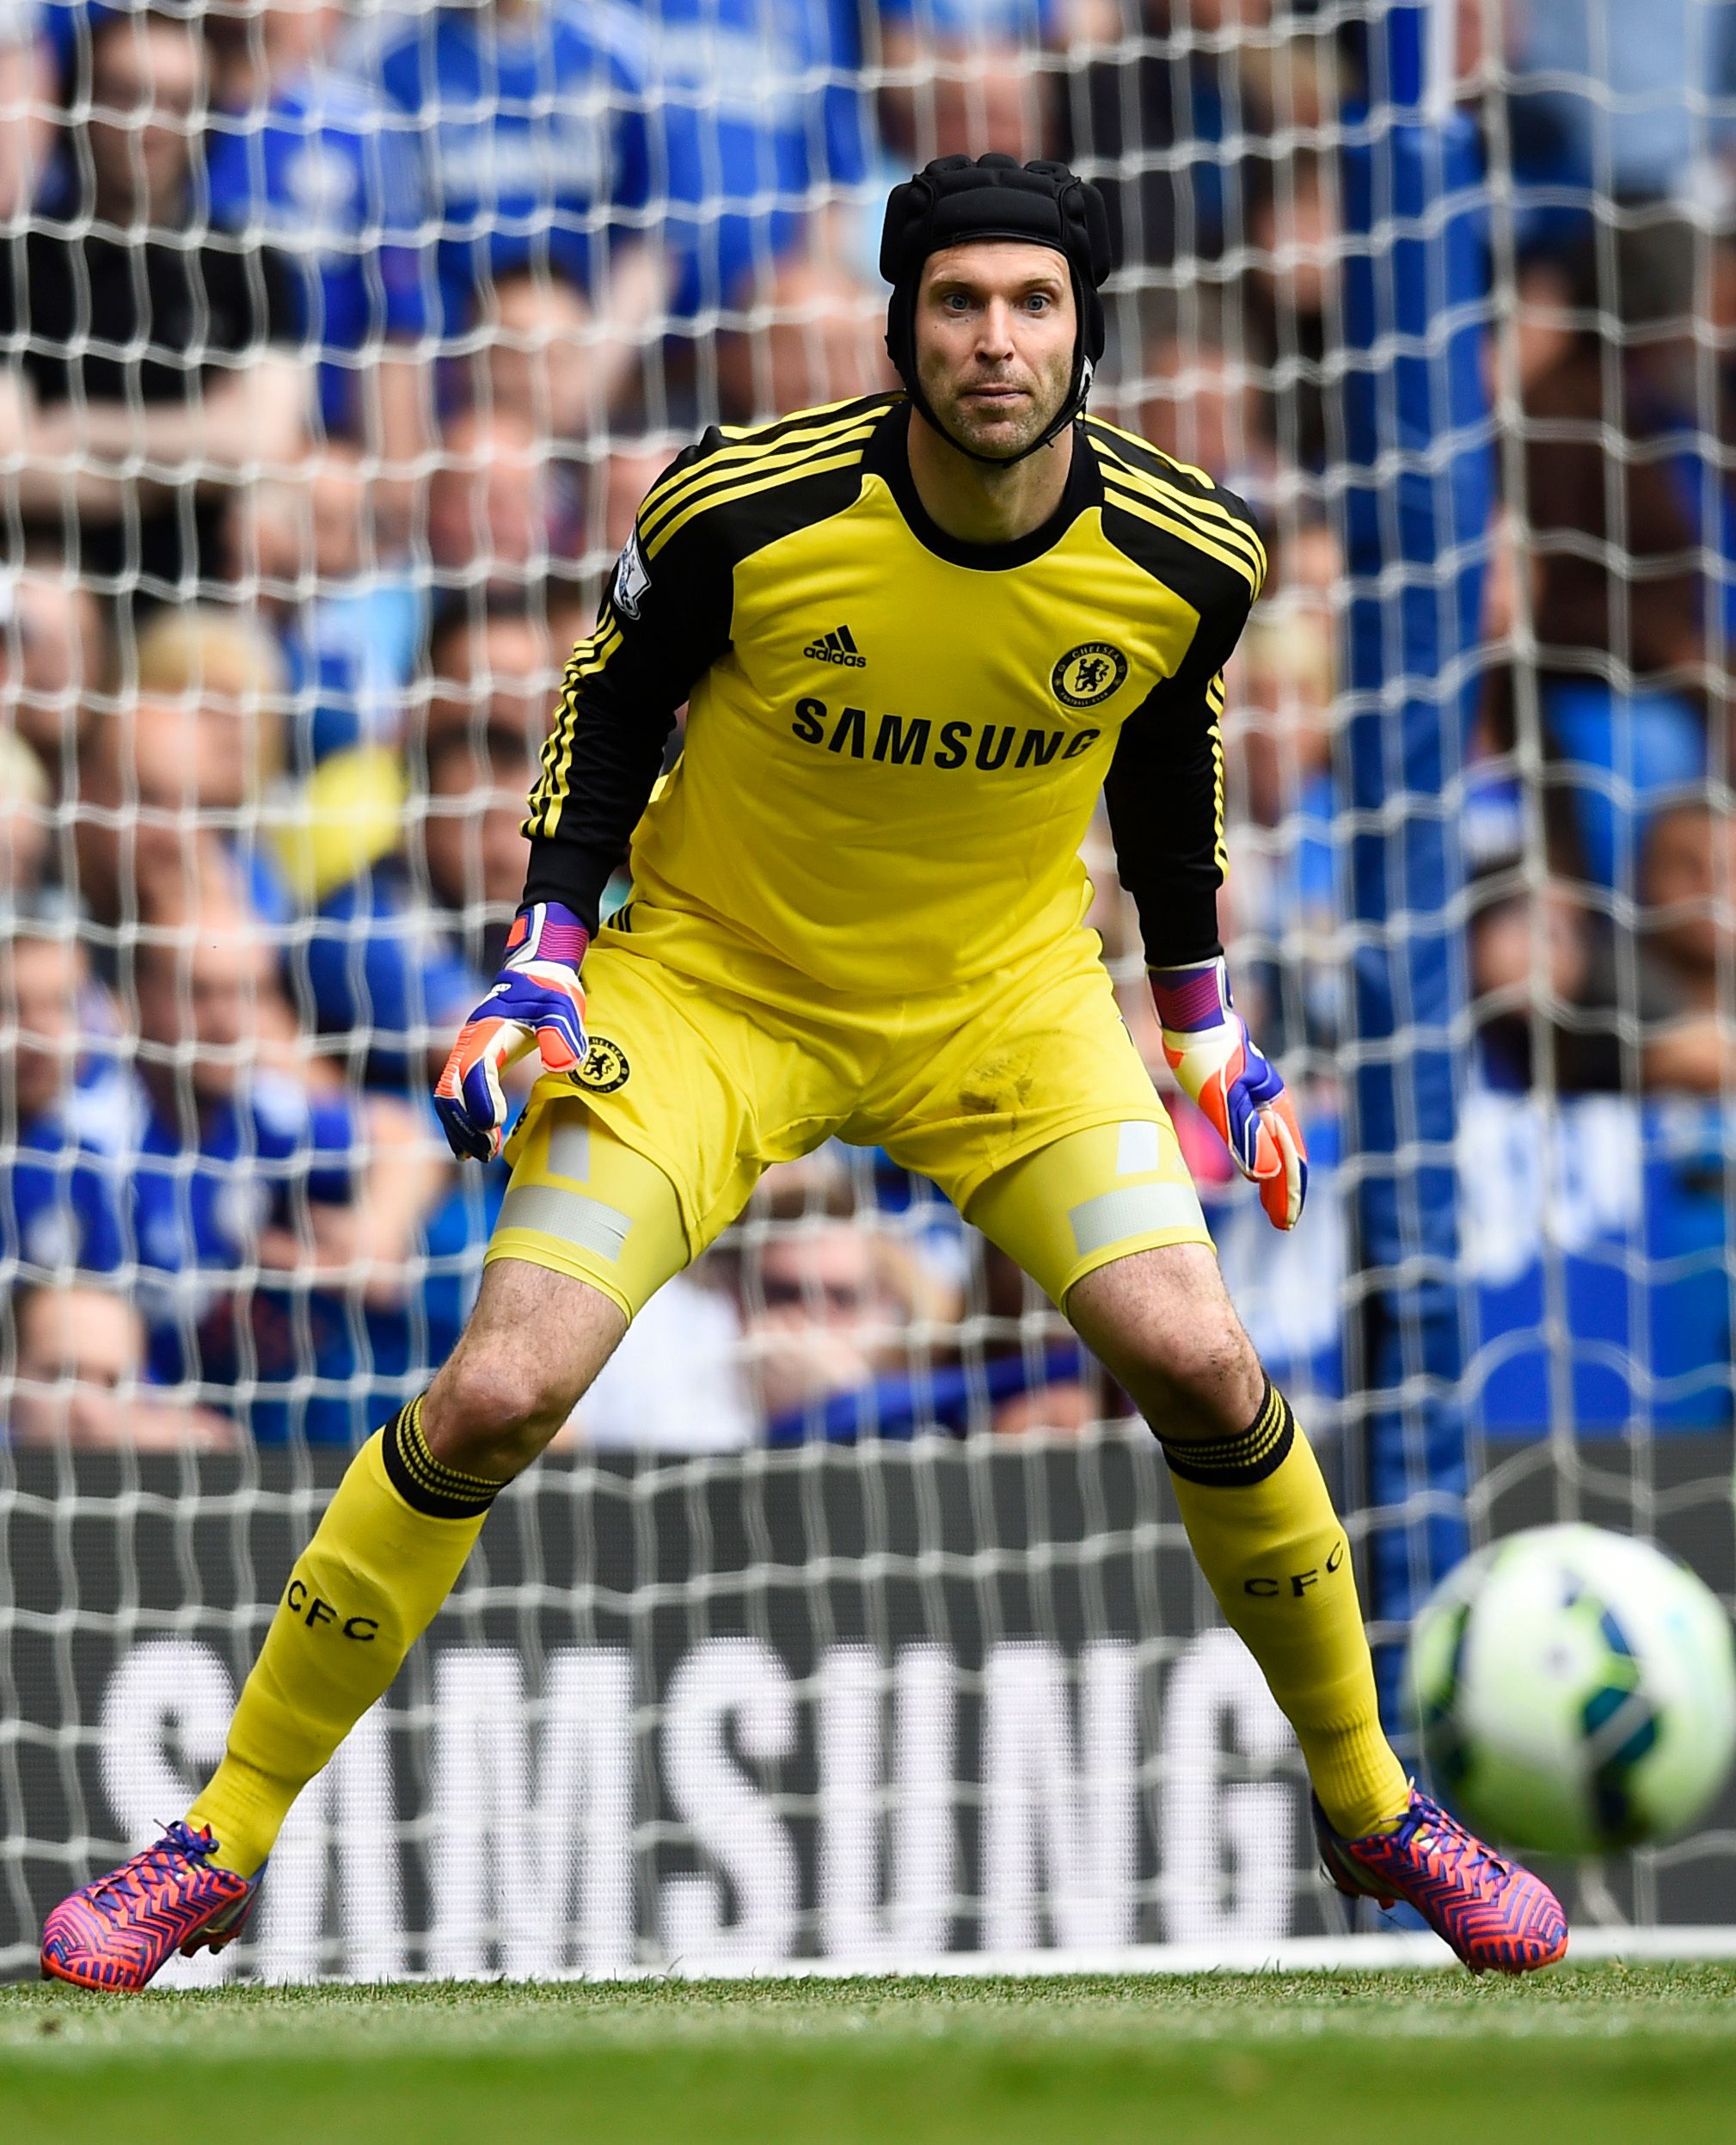 Cech playing for Chelsea.